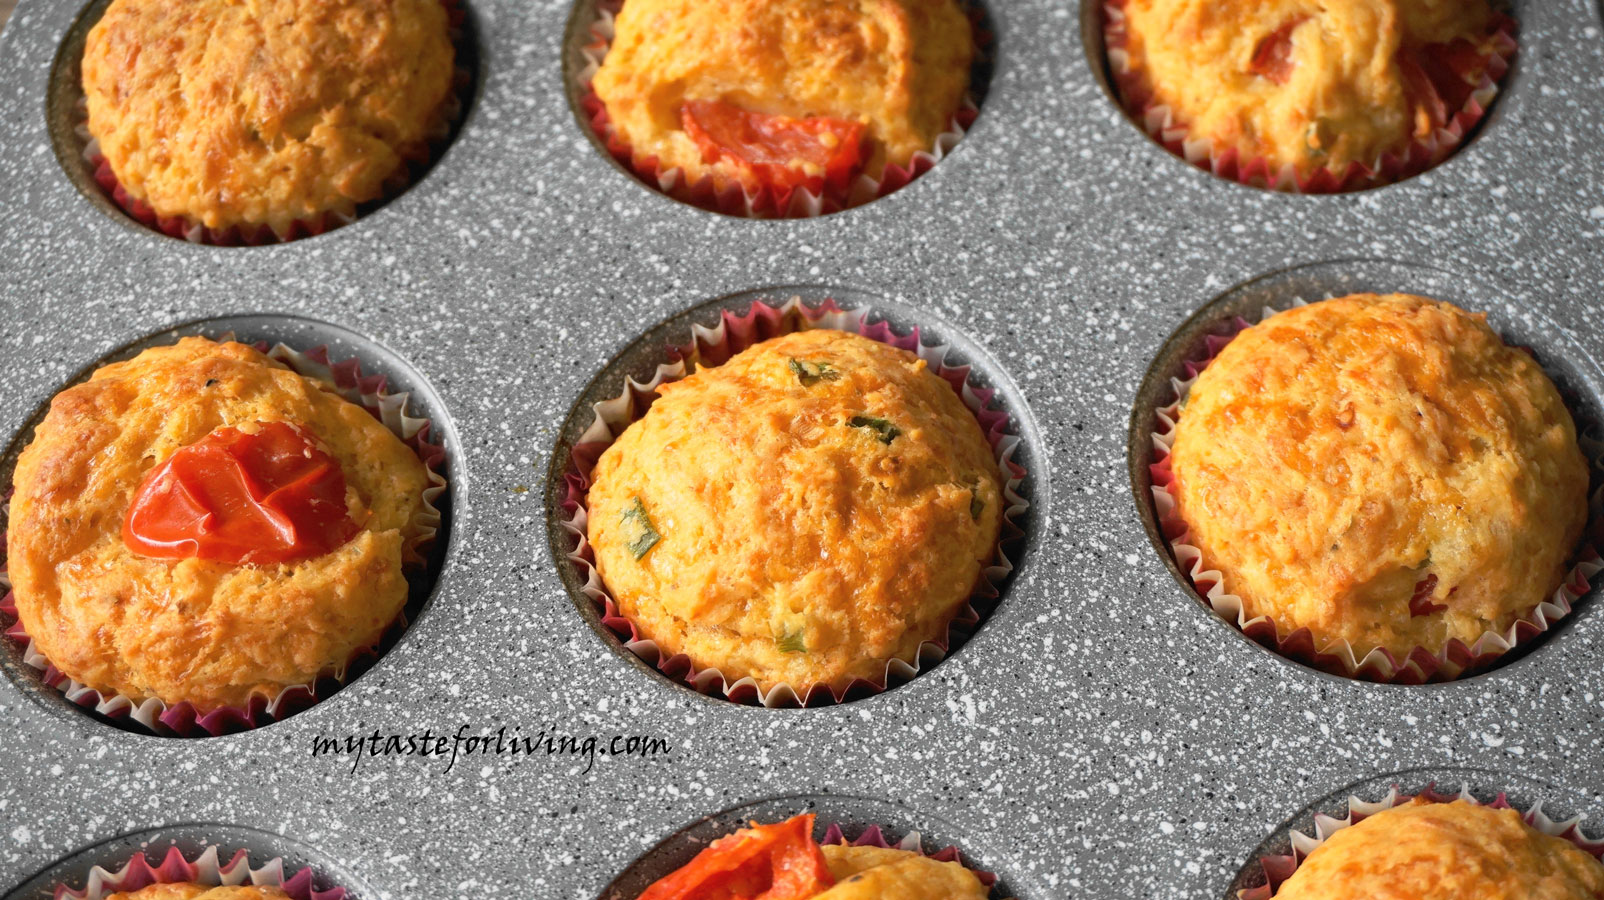 Salted muffins with cherry tomatoes, cheddar, fresh green onions and oregano, reminding us of the taste of pizza.